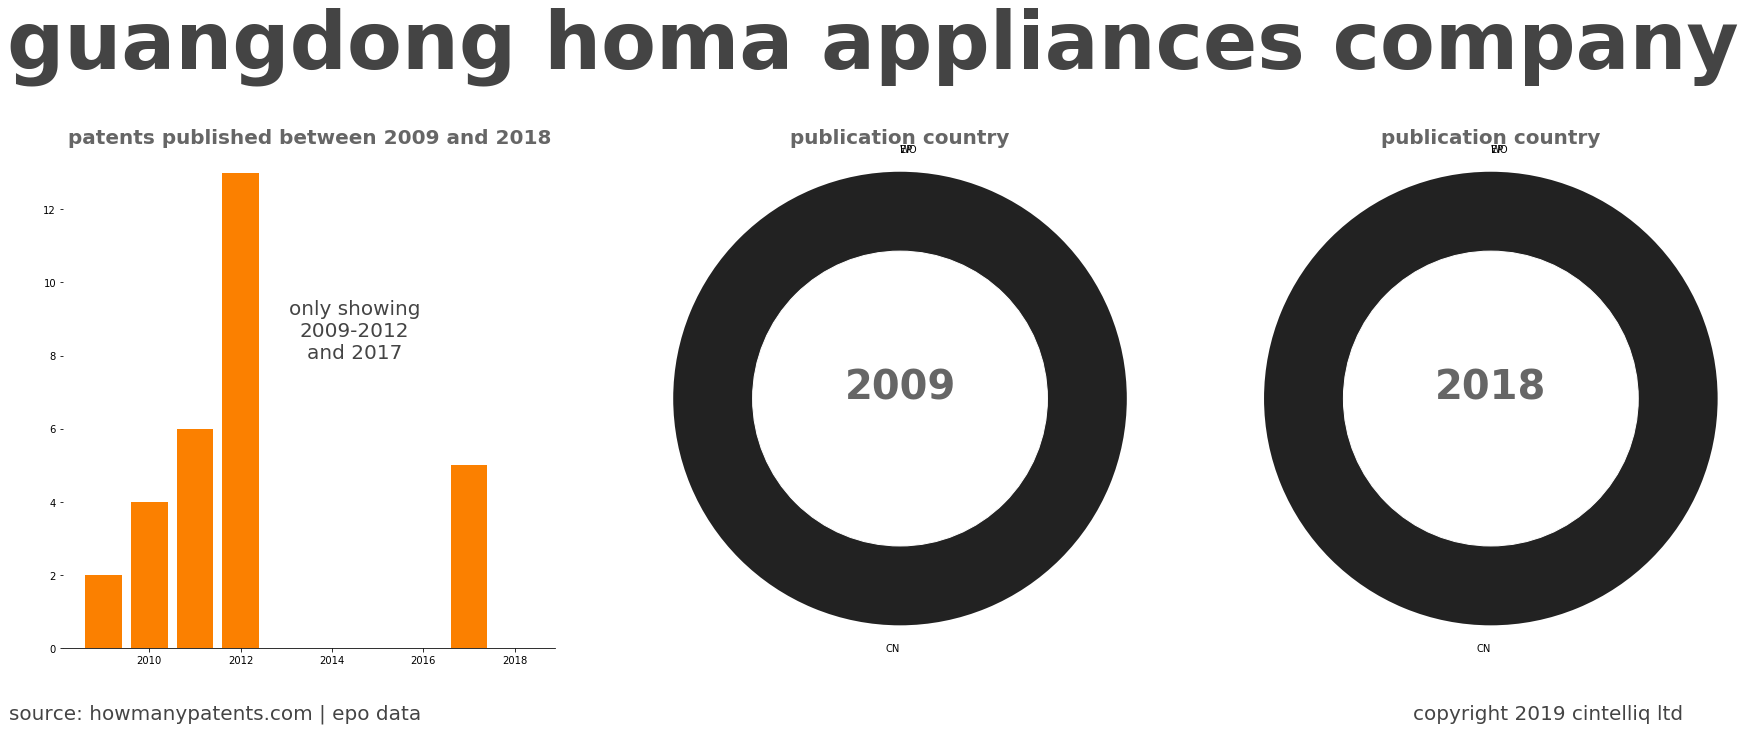 summary of patents for Guangdong Homa Appliances Company